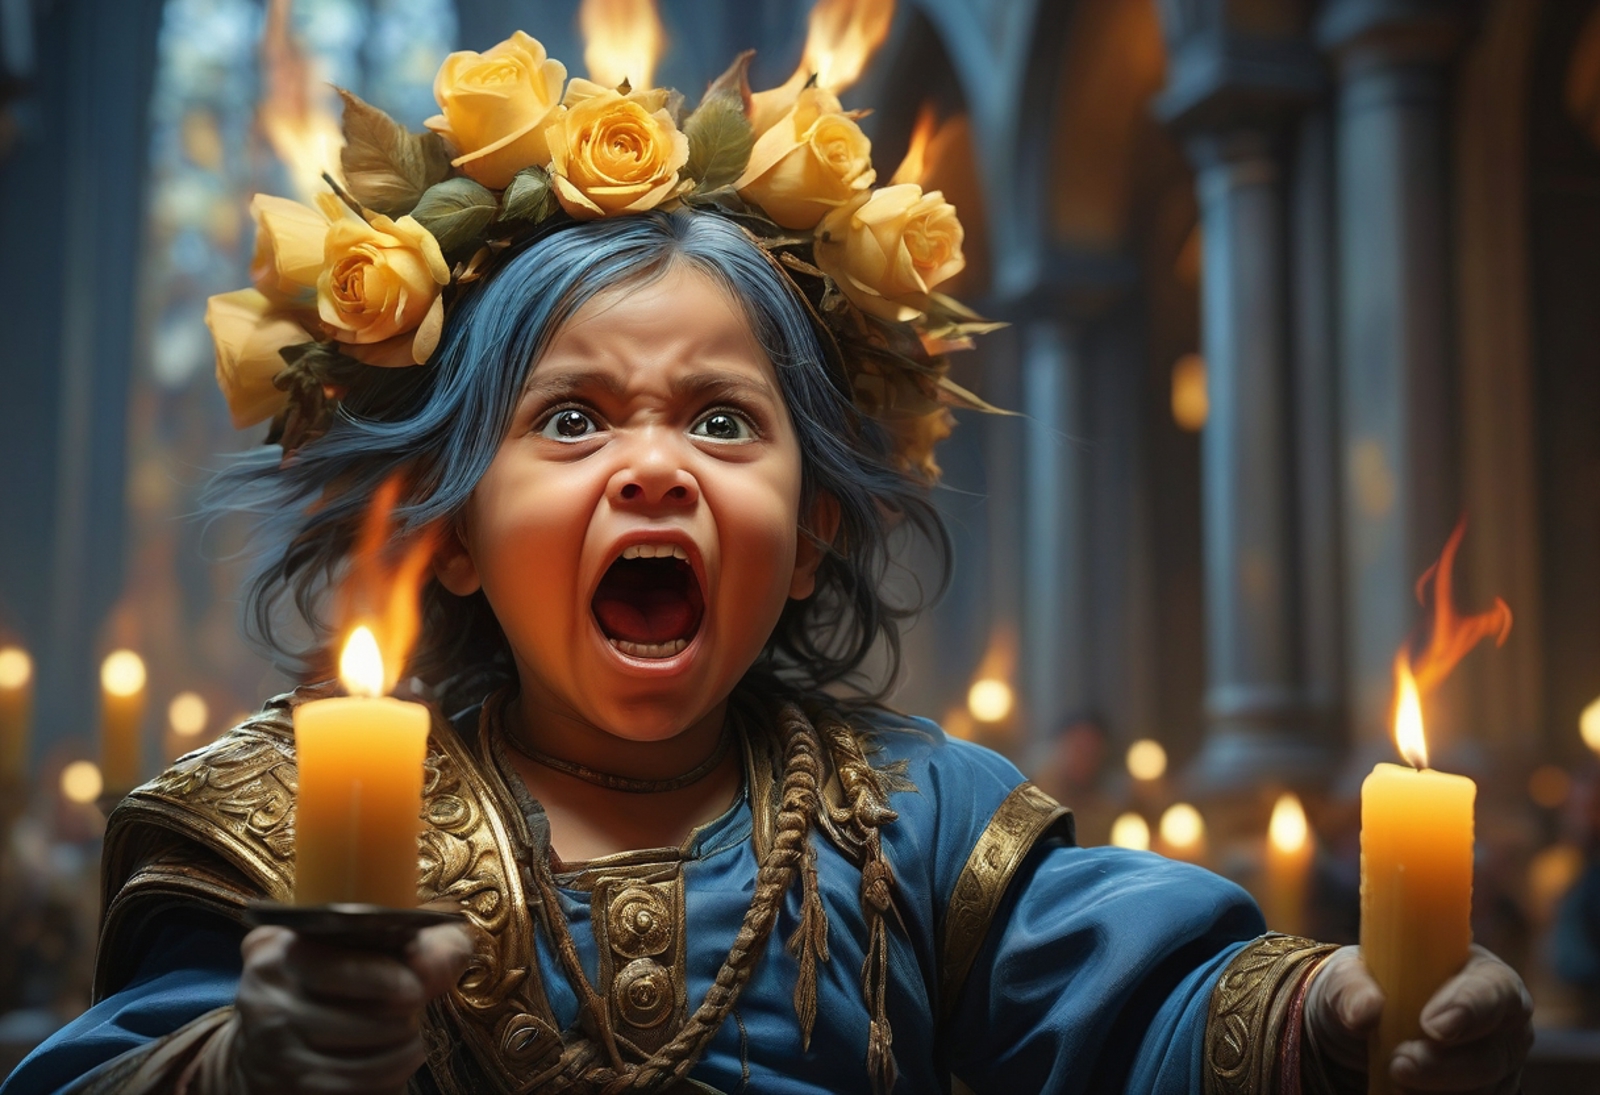 A young girl with blue hair and a crown of flowers is yelling with her mouth open. She is holding a lit candle in her hand. The scene takes place in a dark room.